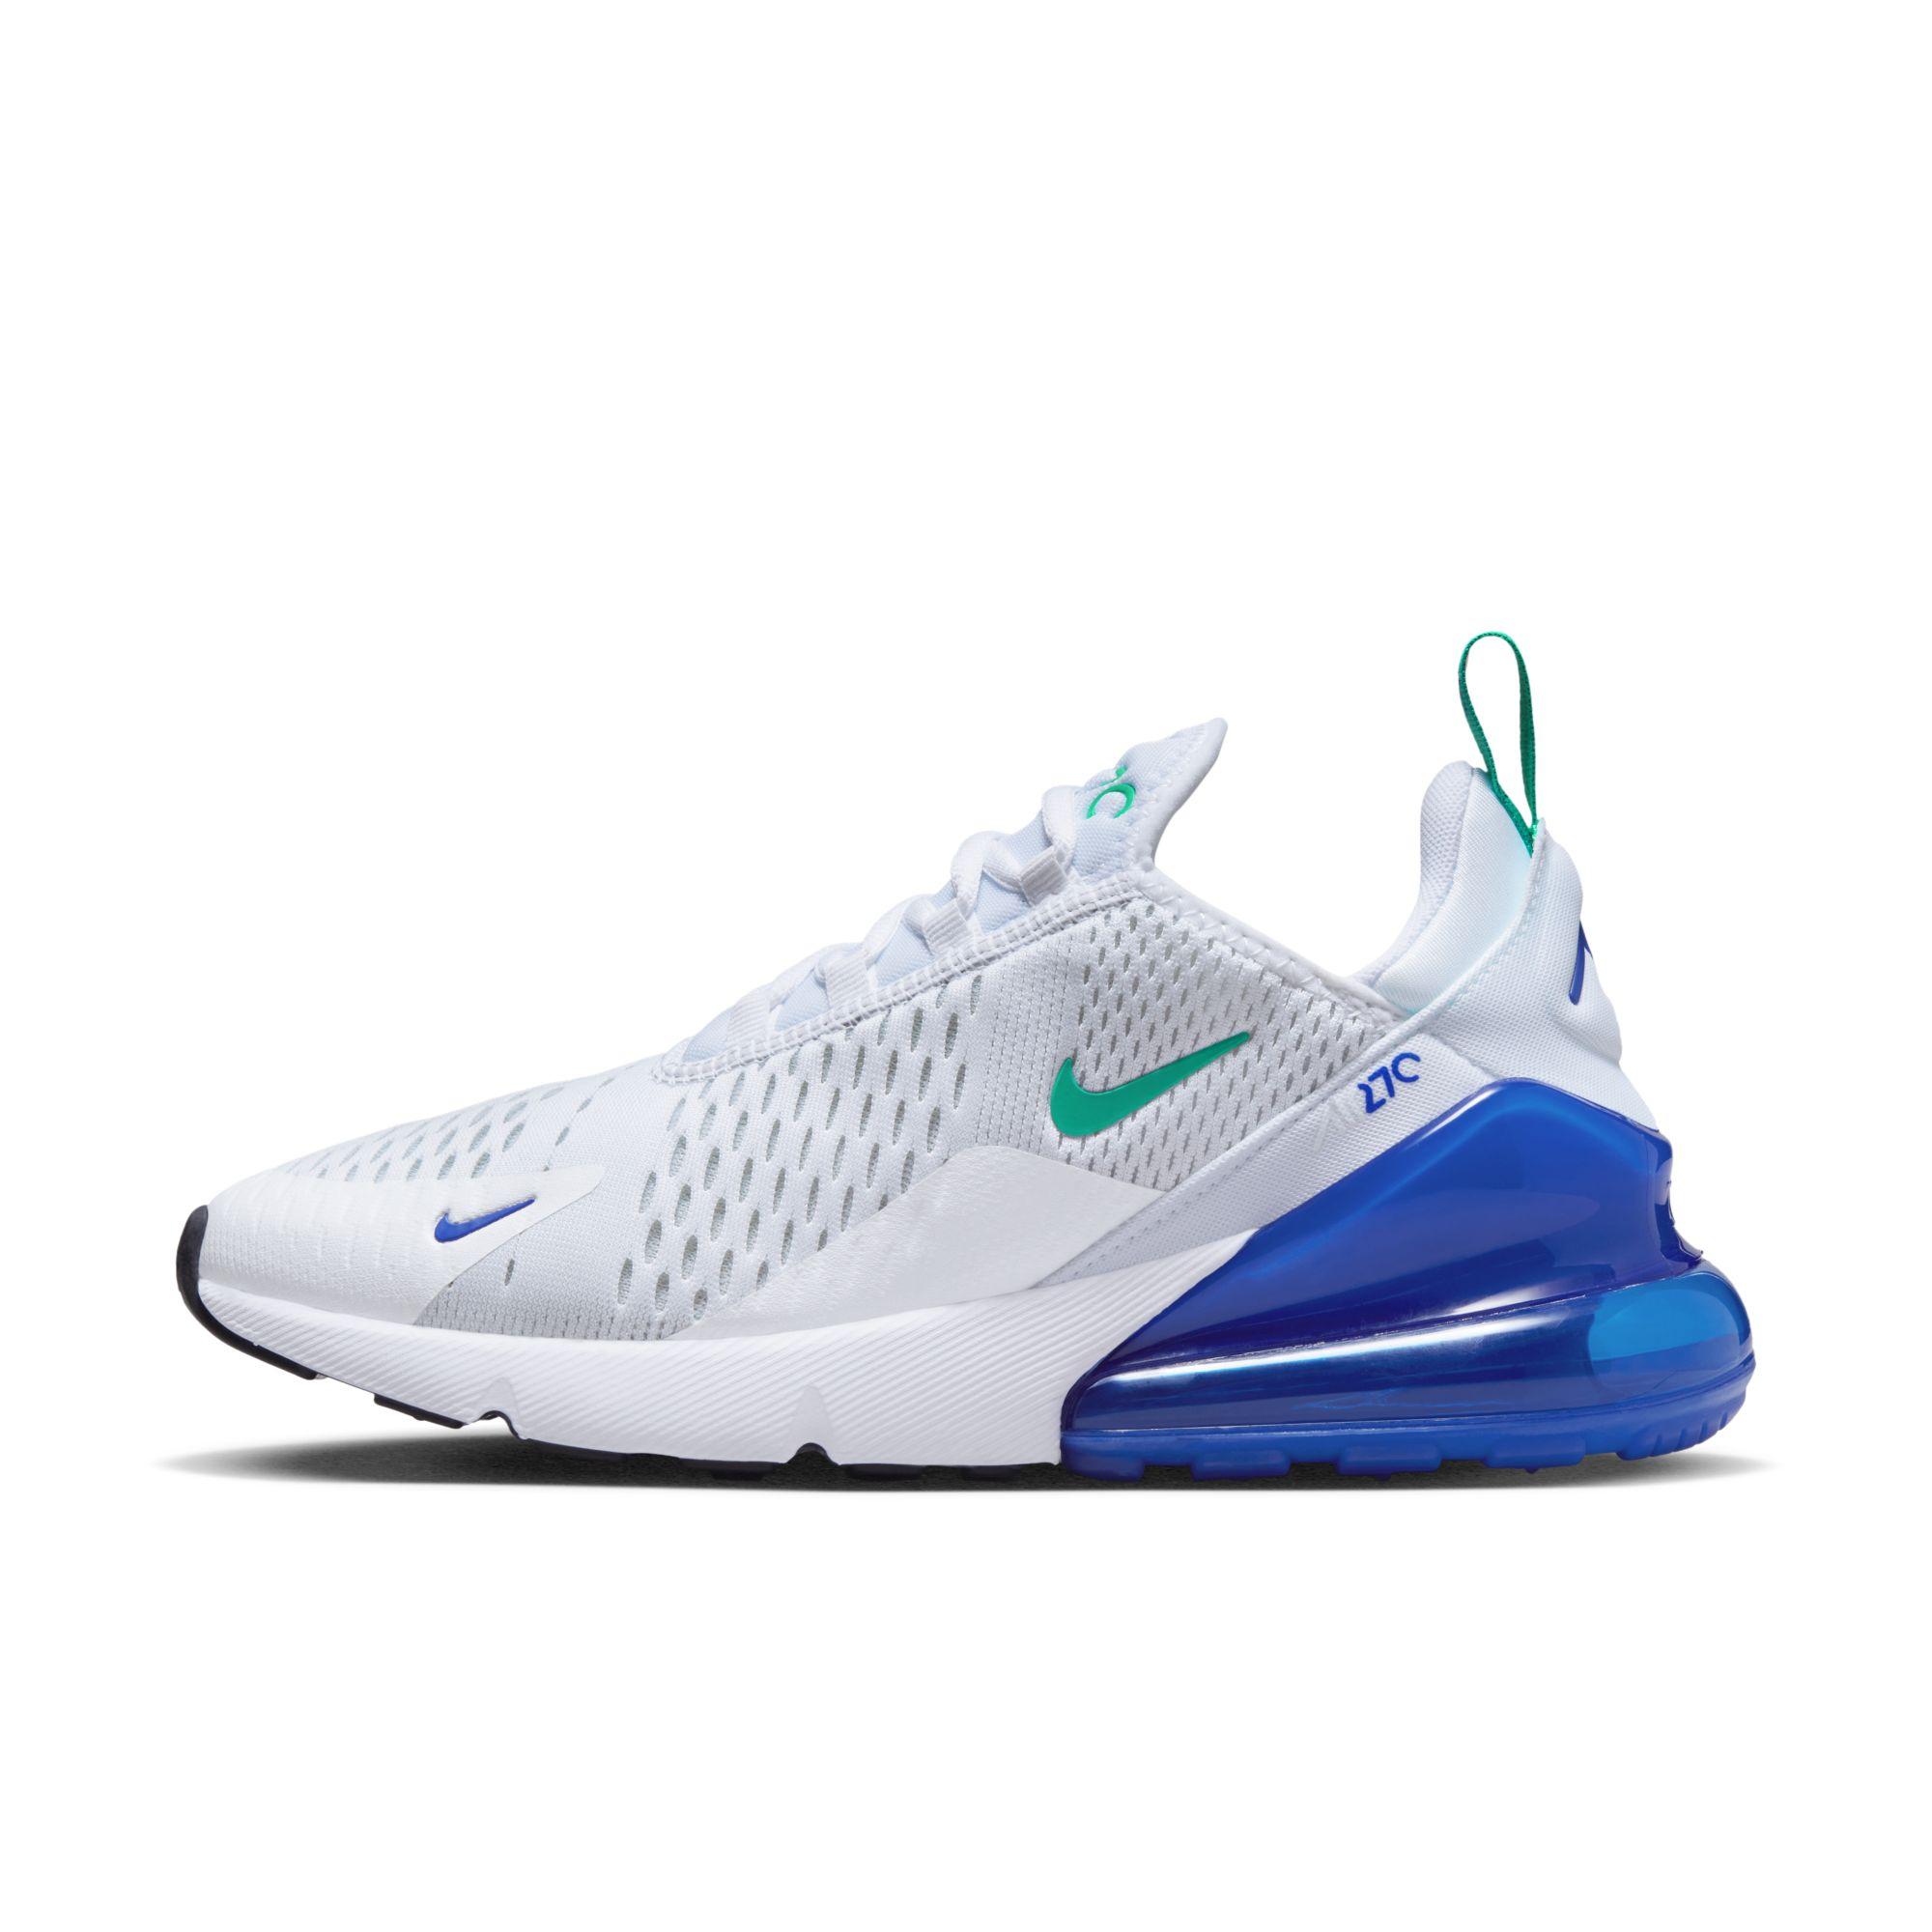 Nike Air Max 270 Shoes in Blue | Lyst